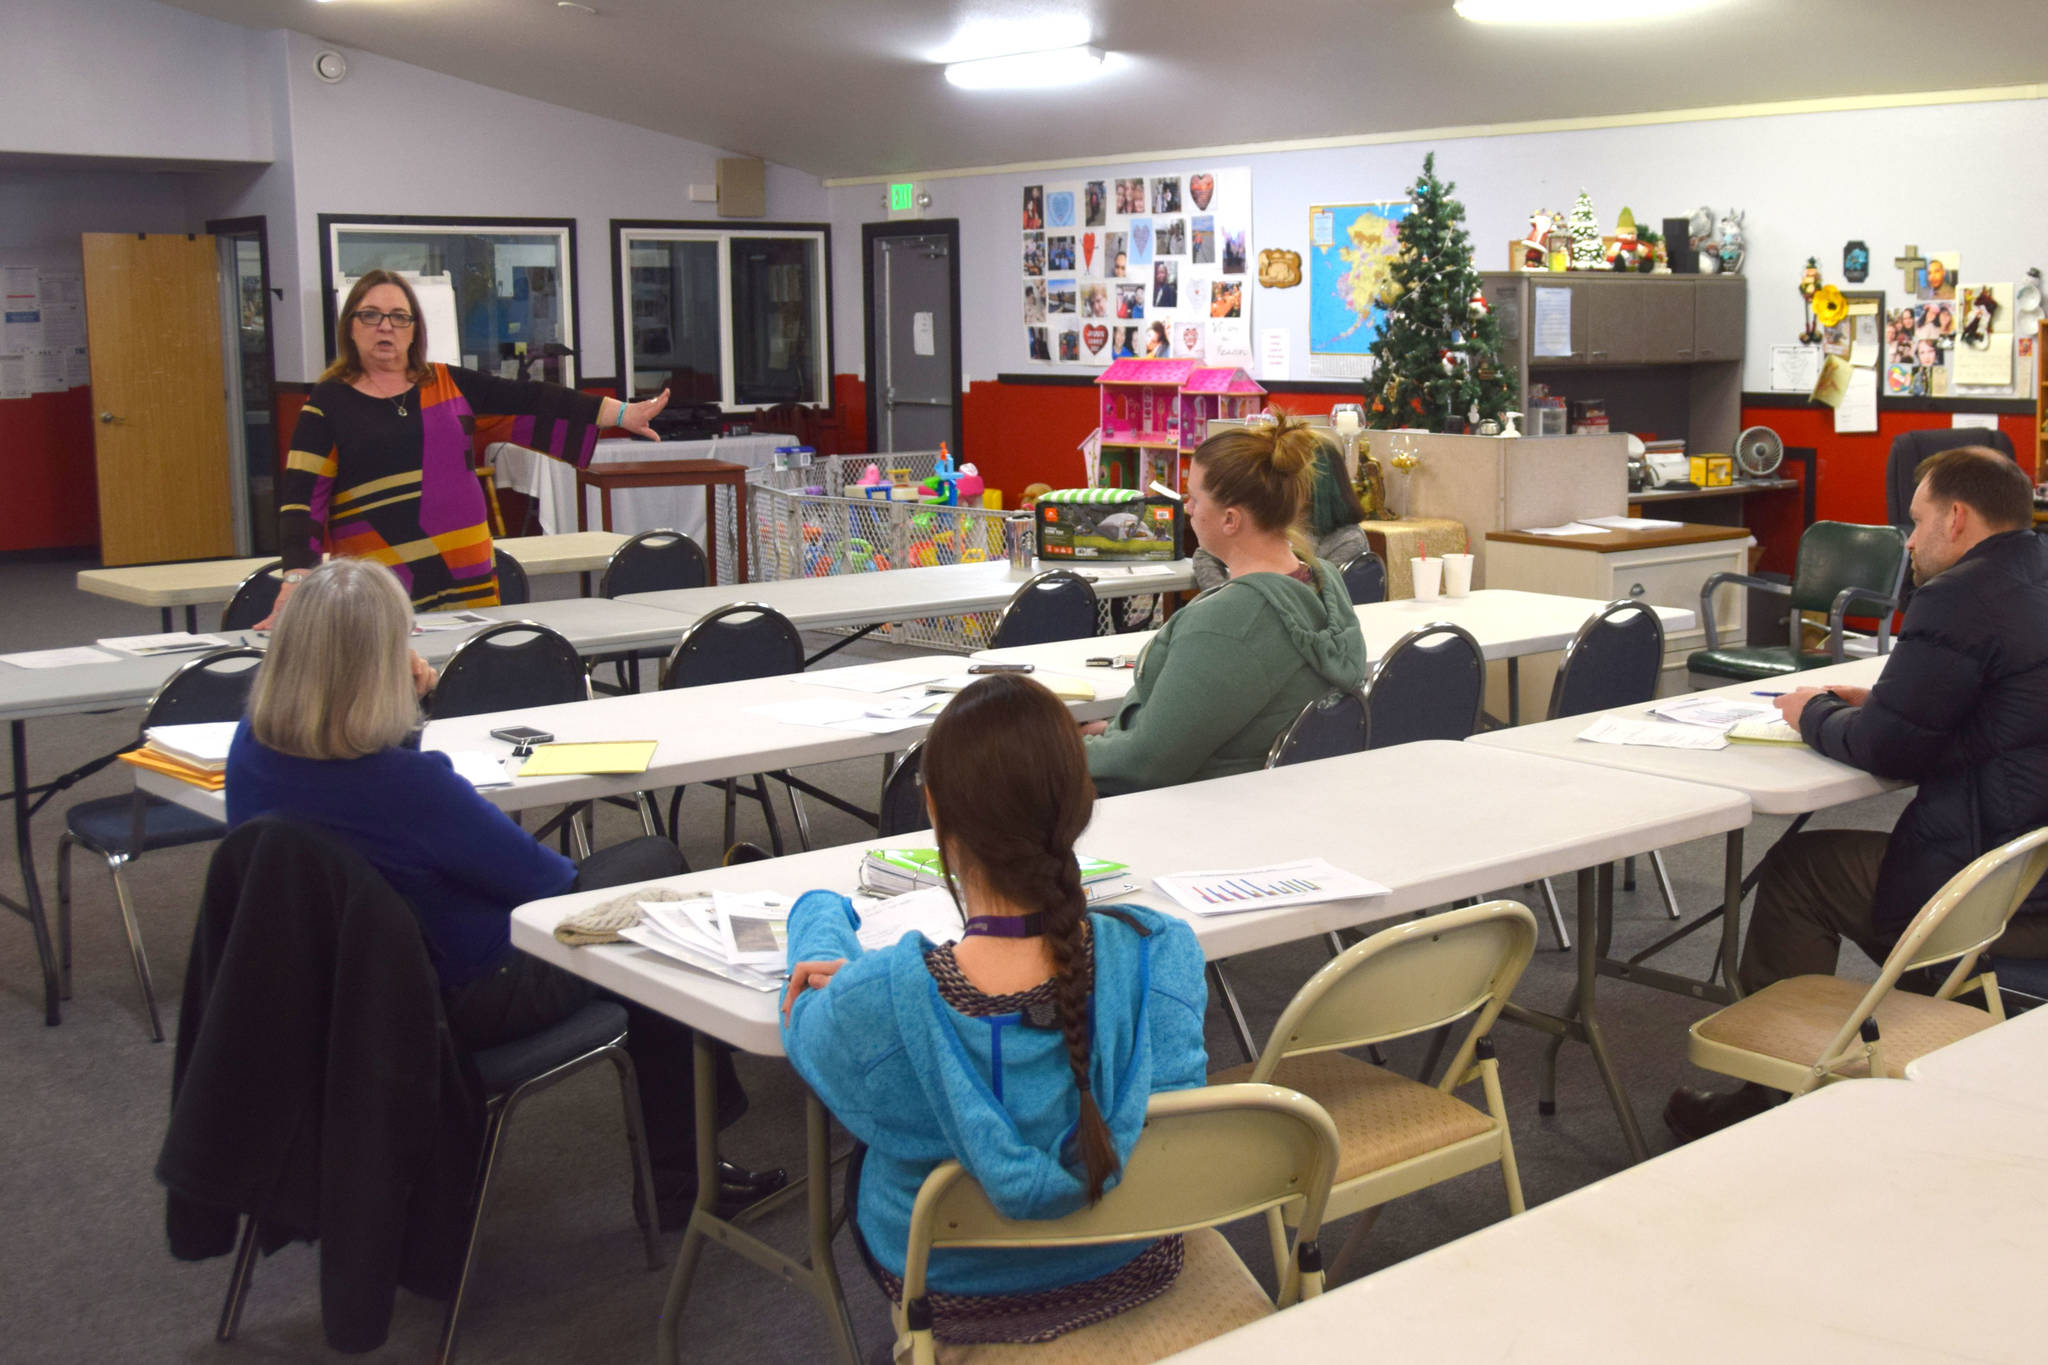 The Shelter Development Workgroup meets on Thursday, Feb. 7, 2019 at Love, INC in Soldotna to discuss emergency shelters and transitional housing for the peninsula. (Photo by Brian Mazurek/Peninsula Clarion)